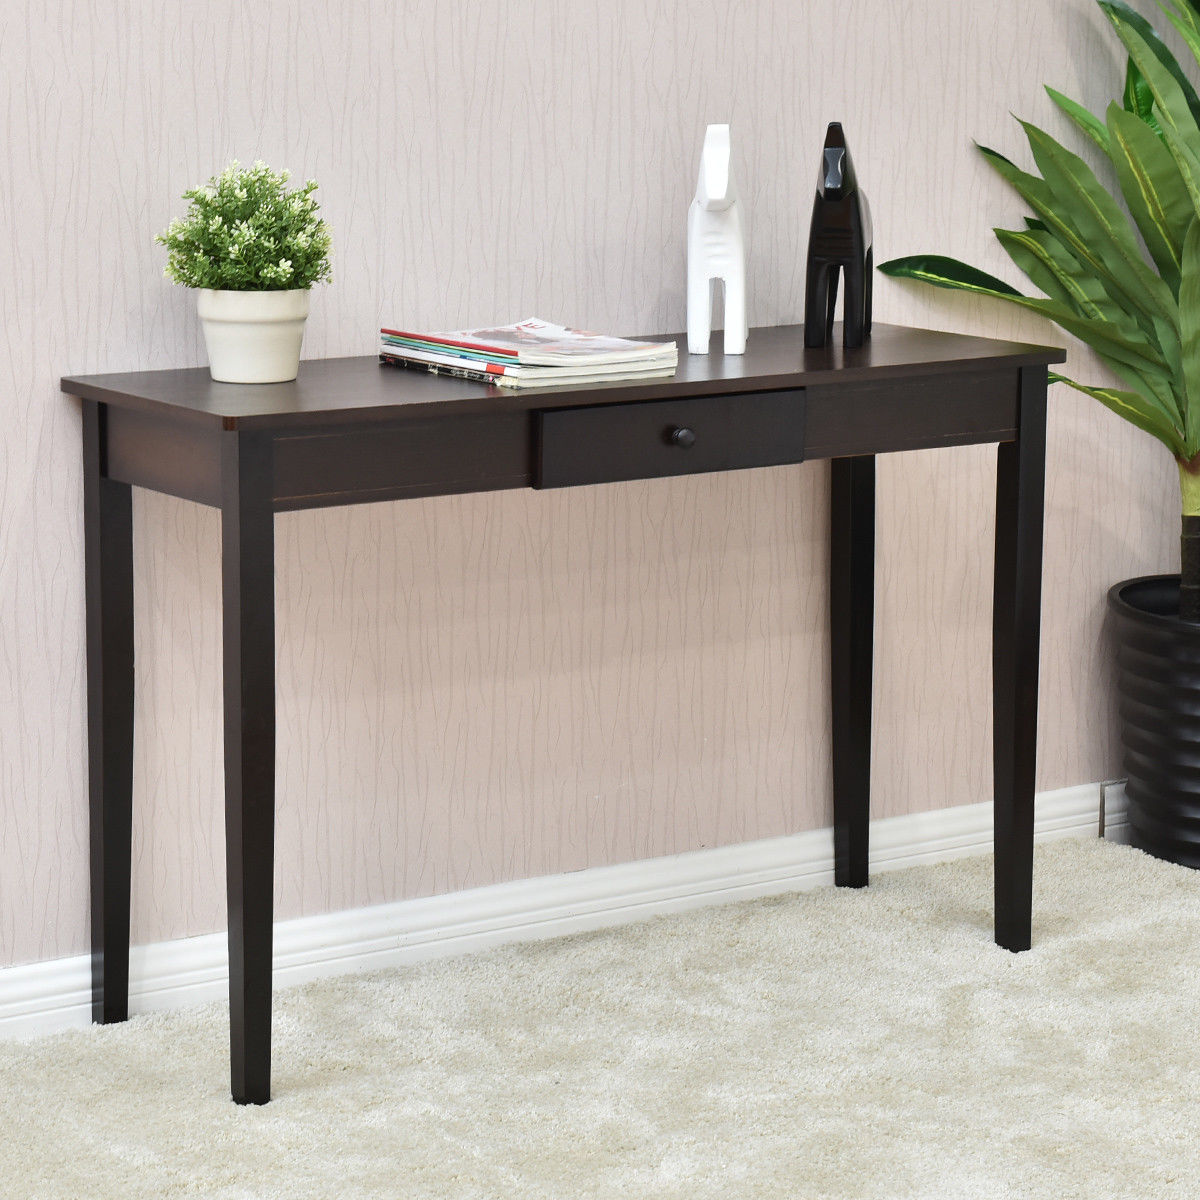 giantex console table entry hallway desk entryway side sofa accent with drawer modern wood living room furniture big round coffee unique wine racks small decorative battery